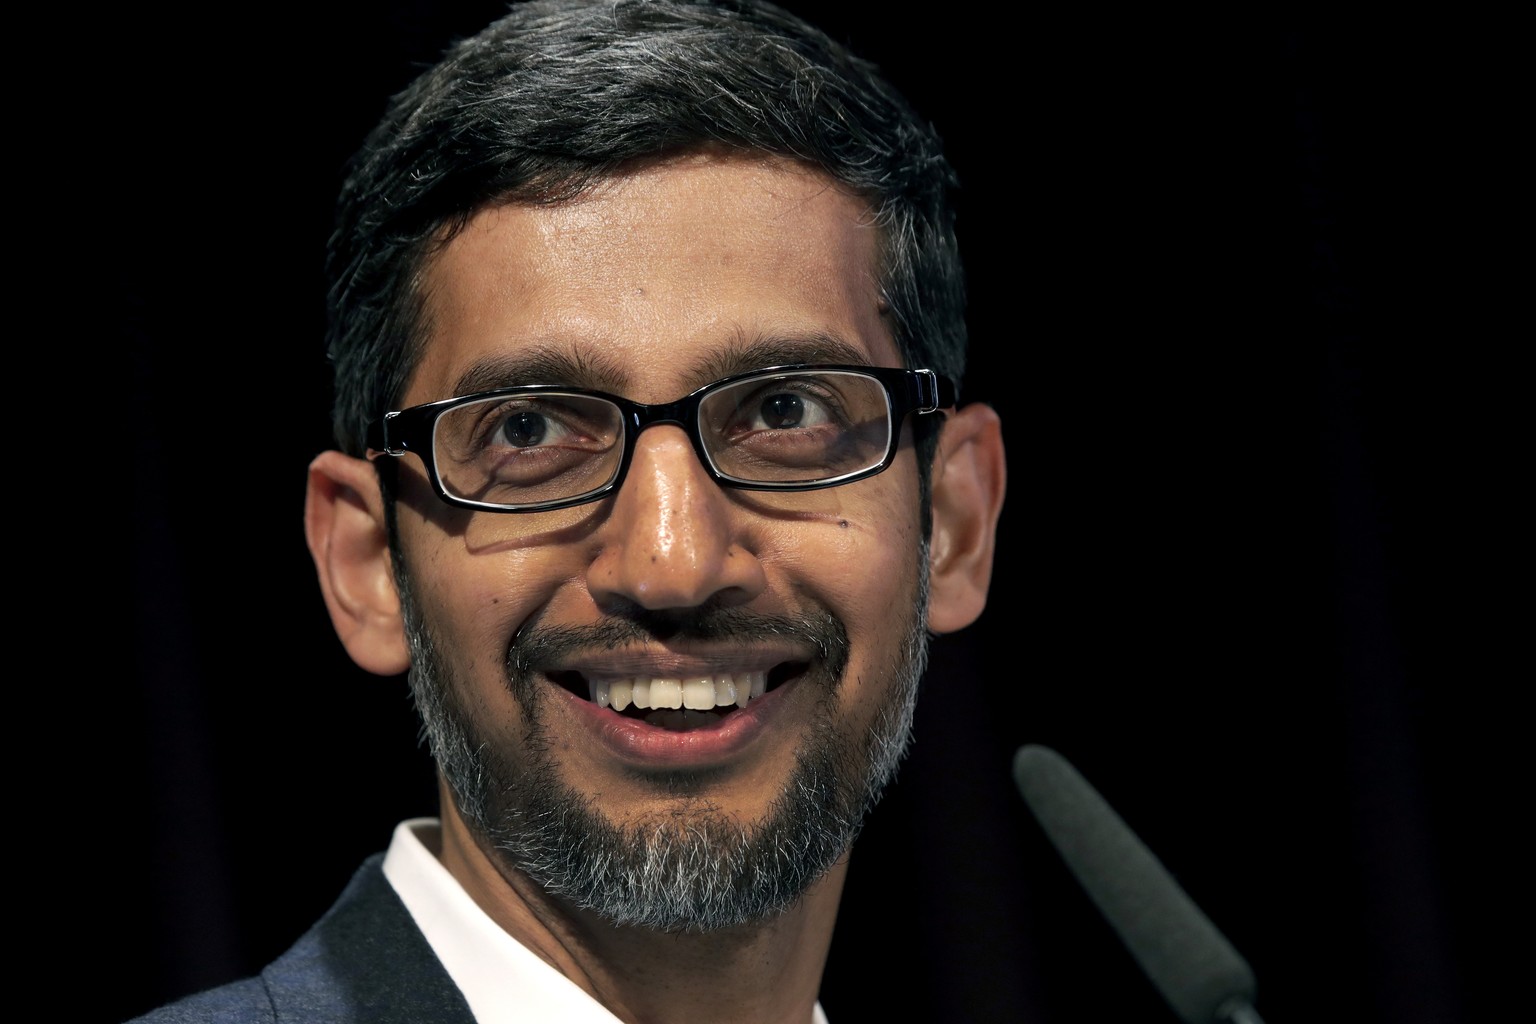 FILE - In this Tuesday, Jan. 22, 2019, file photo, Sundar Pichai, CEO of Google, speaks during a statement as part of the opening of a new Google office in Berlin. Google is committing to a White Hous ...